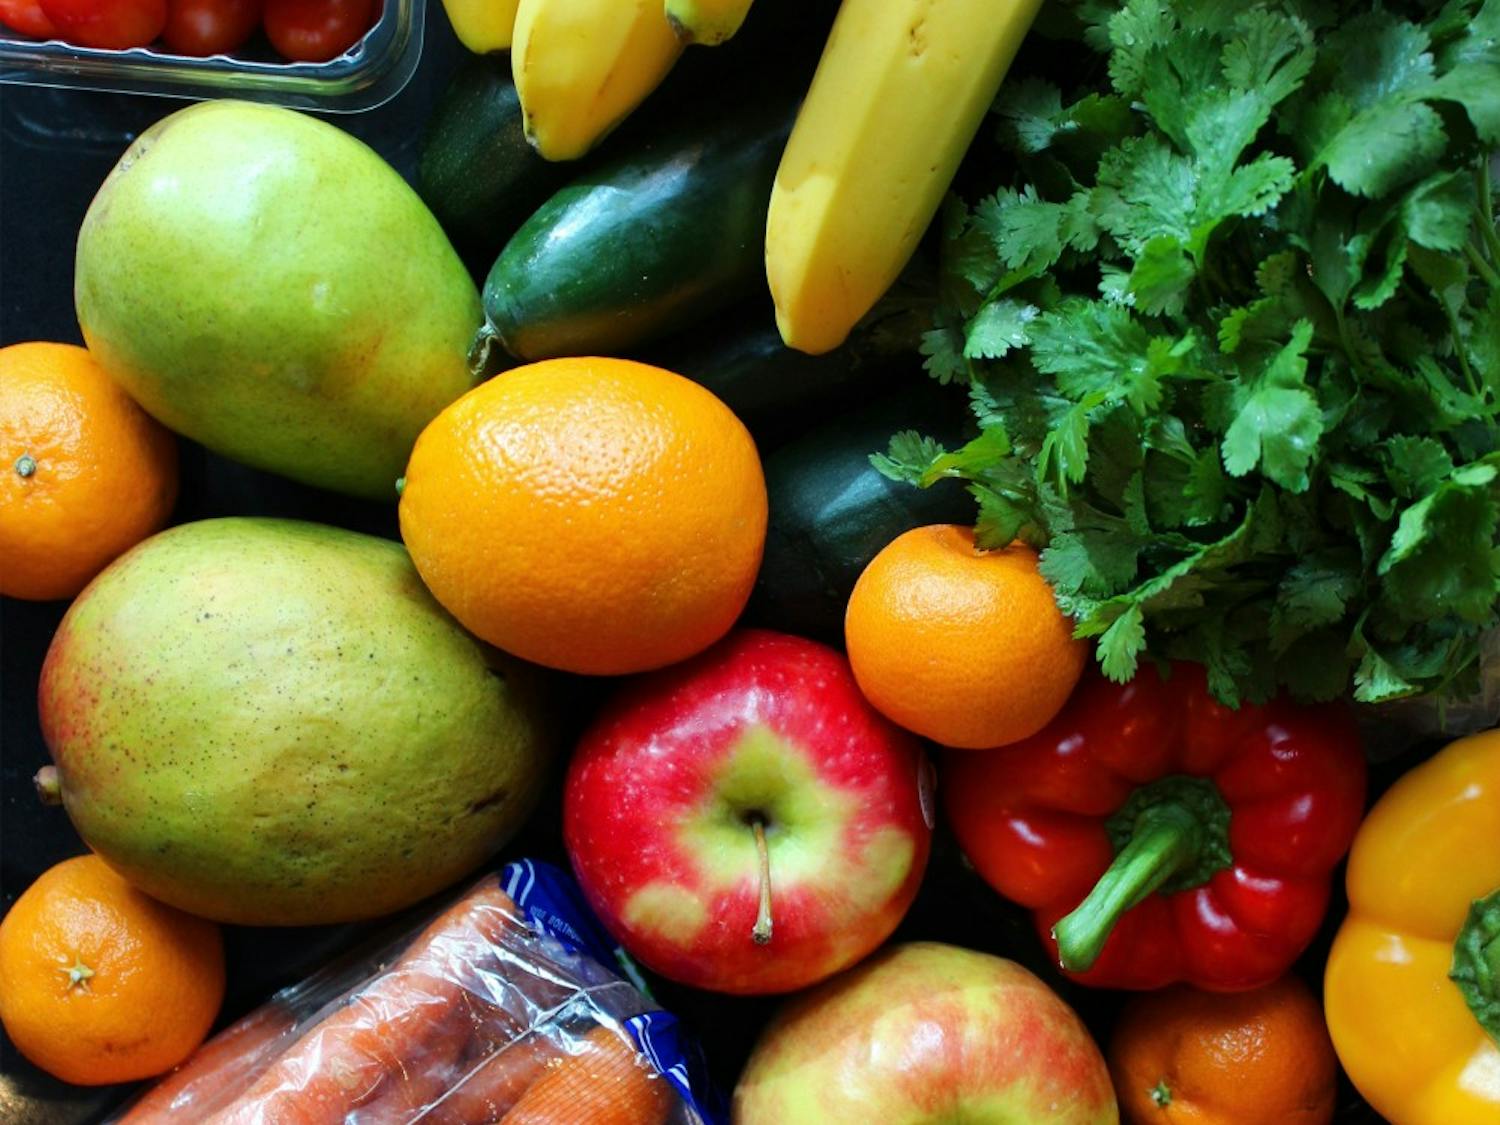 Fresh fruits, vegetables and nuts/seeds are the staples of any type of raw vegan diet.&nbsp;